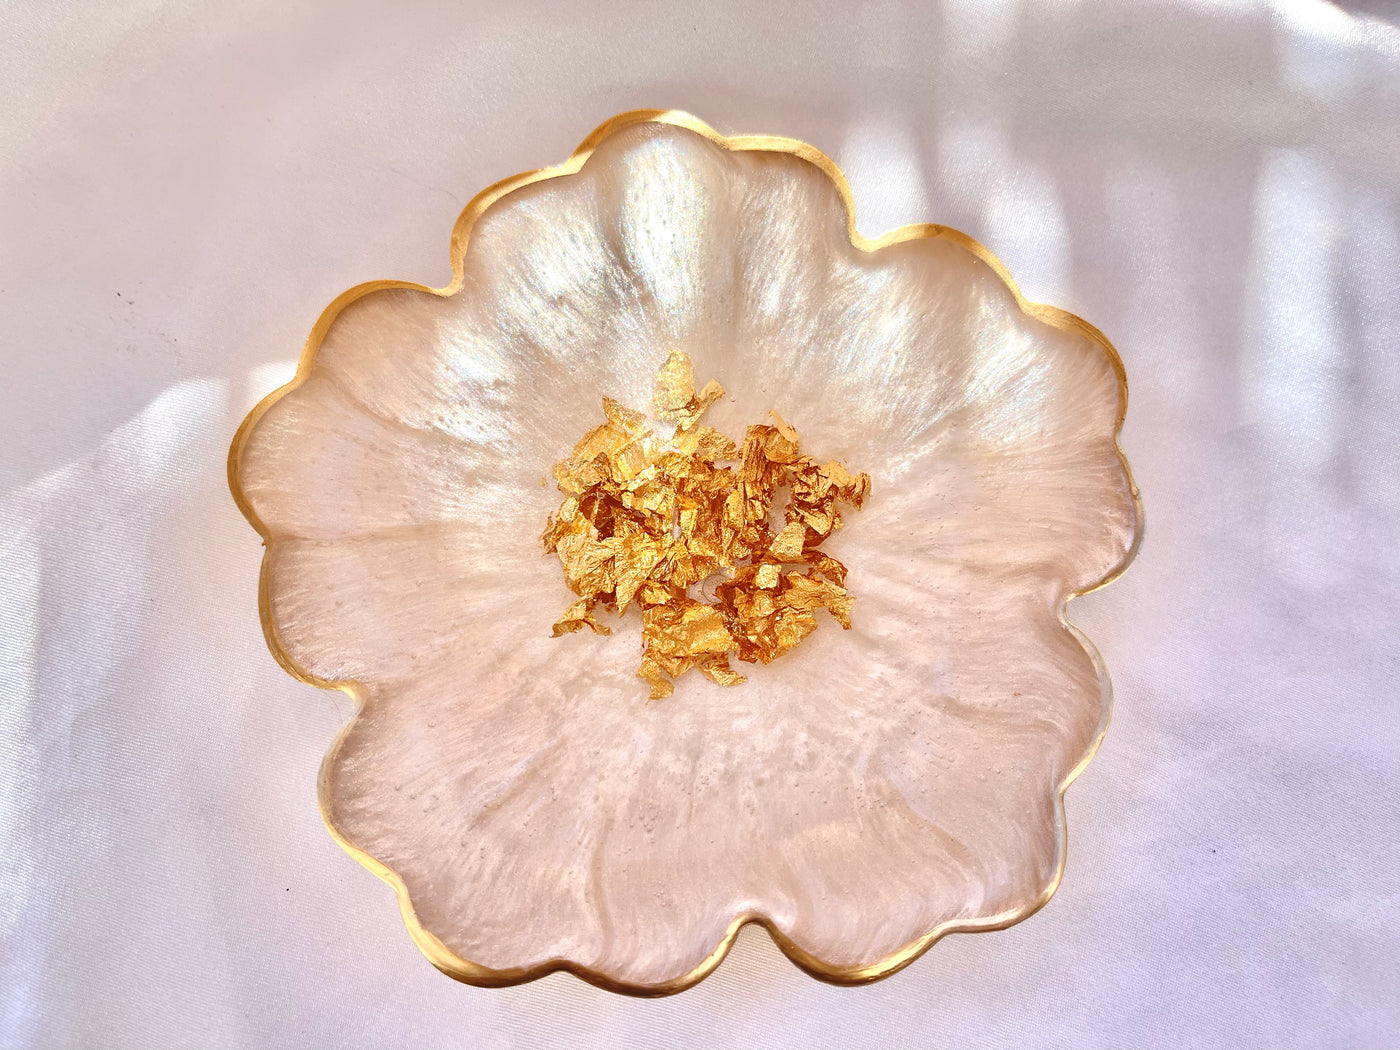 Handmade White Beige Cream and Gold Flower Shaped Coasters  with Gold Accented Rim Edges- Jasmin Renee Art - Three Coasters